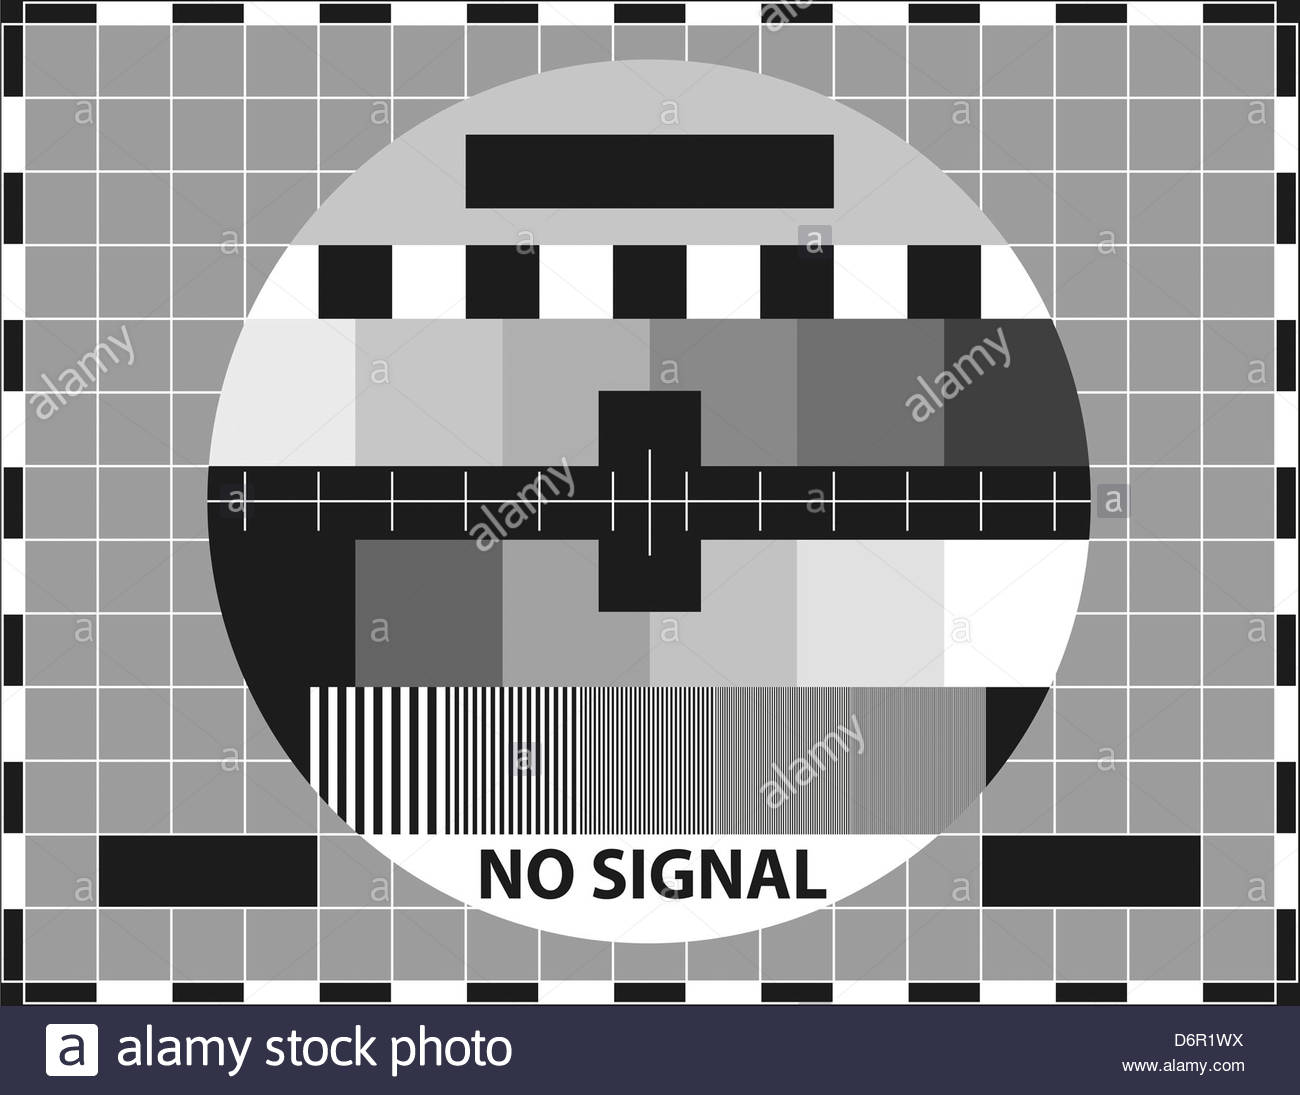 television-test-pattern-used-to-prove-the-quality-of-reception-D6R1WX.jpg